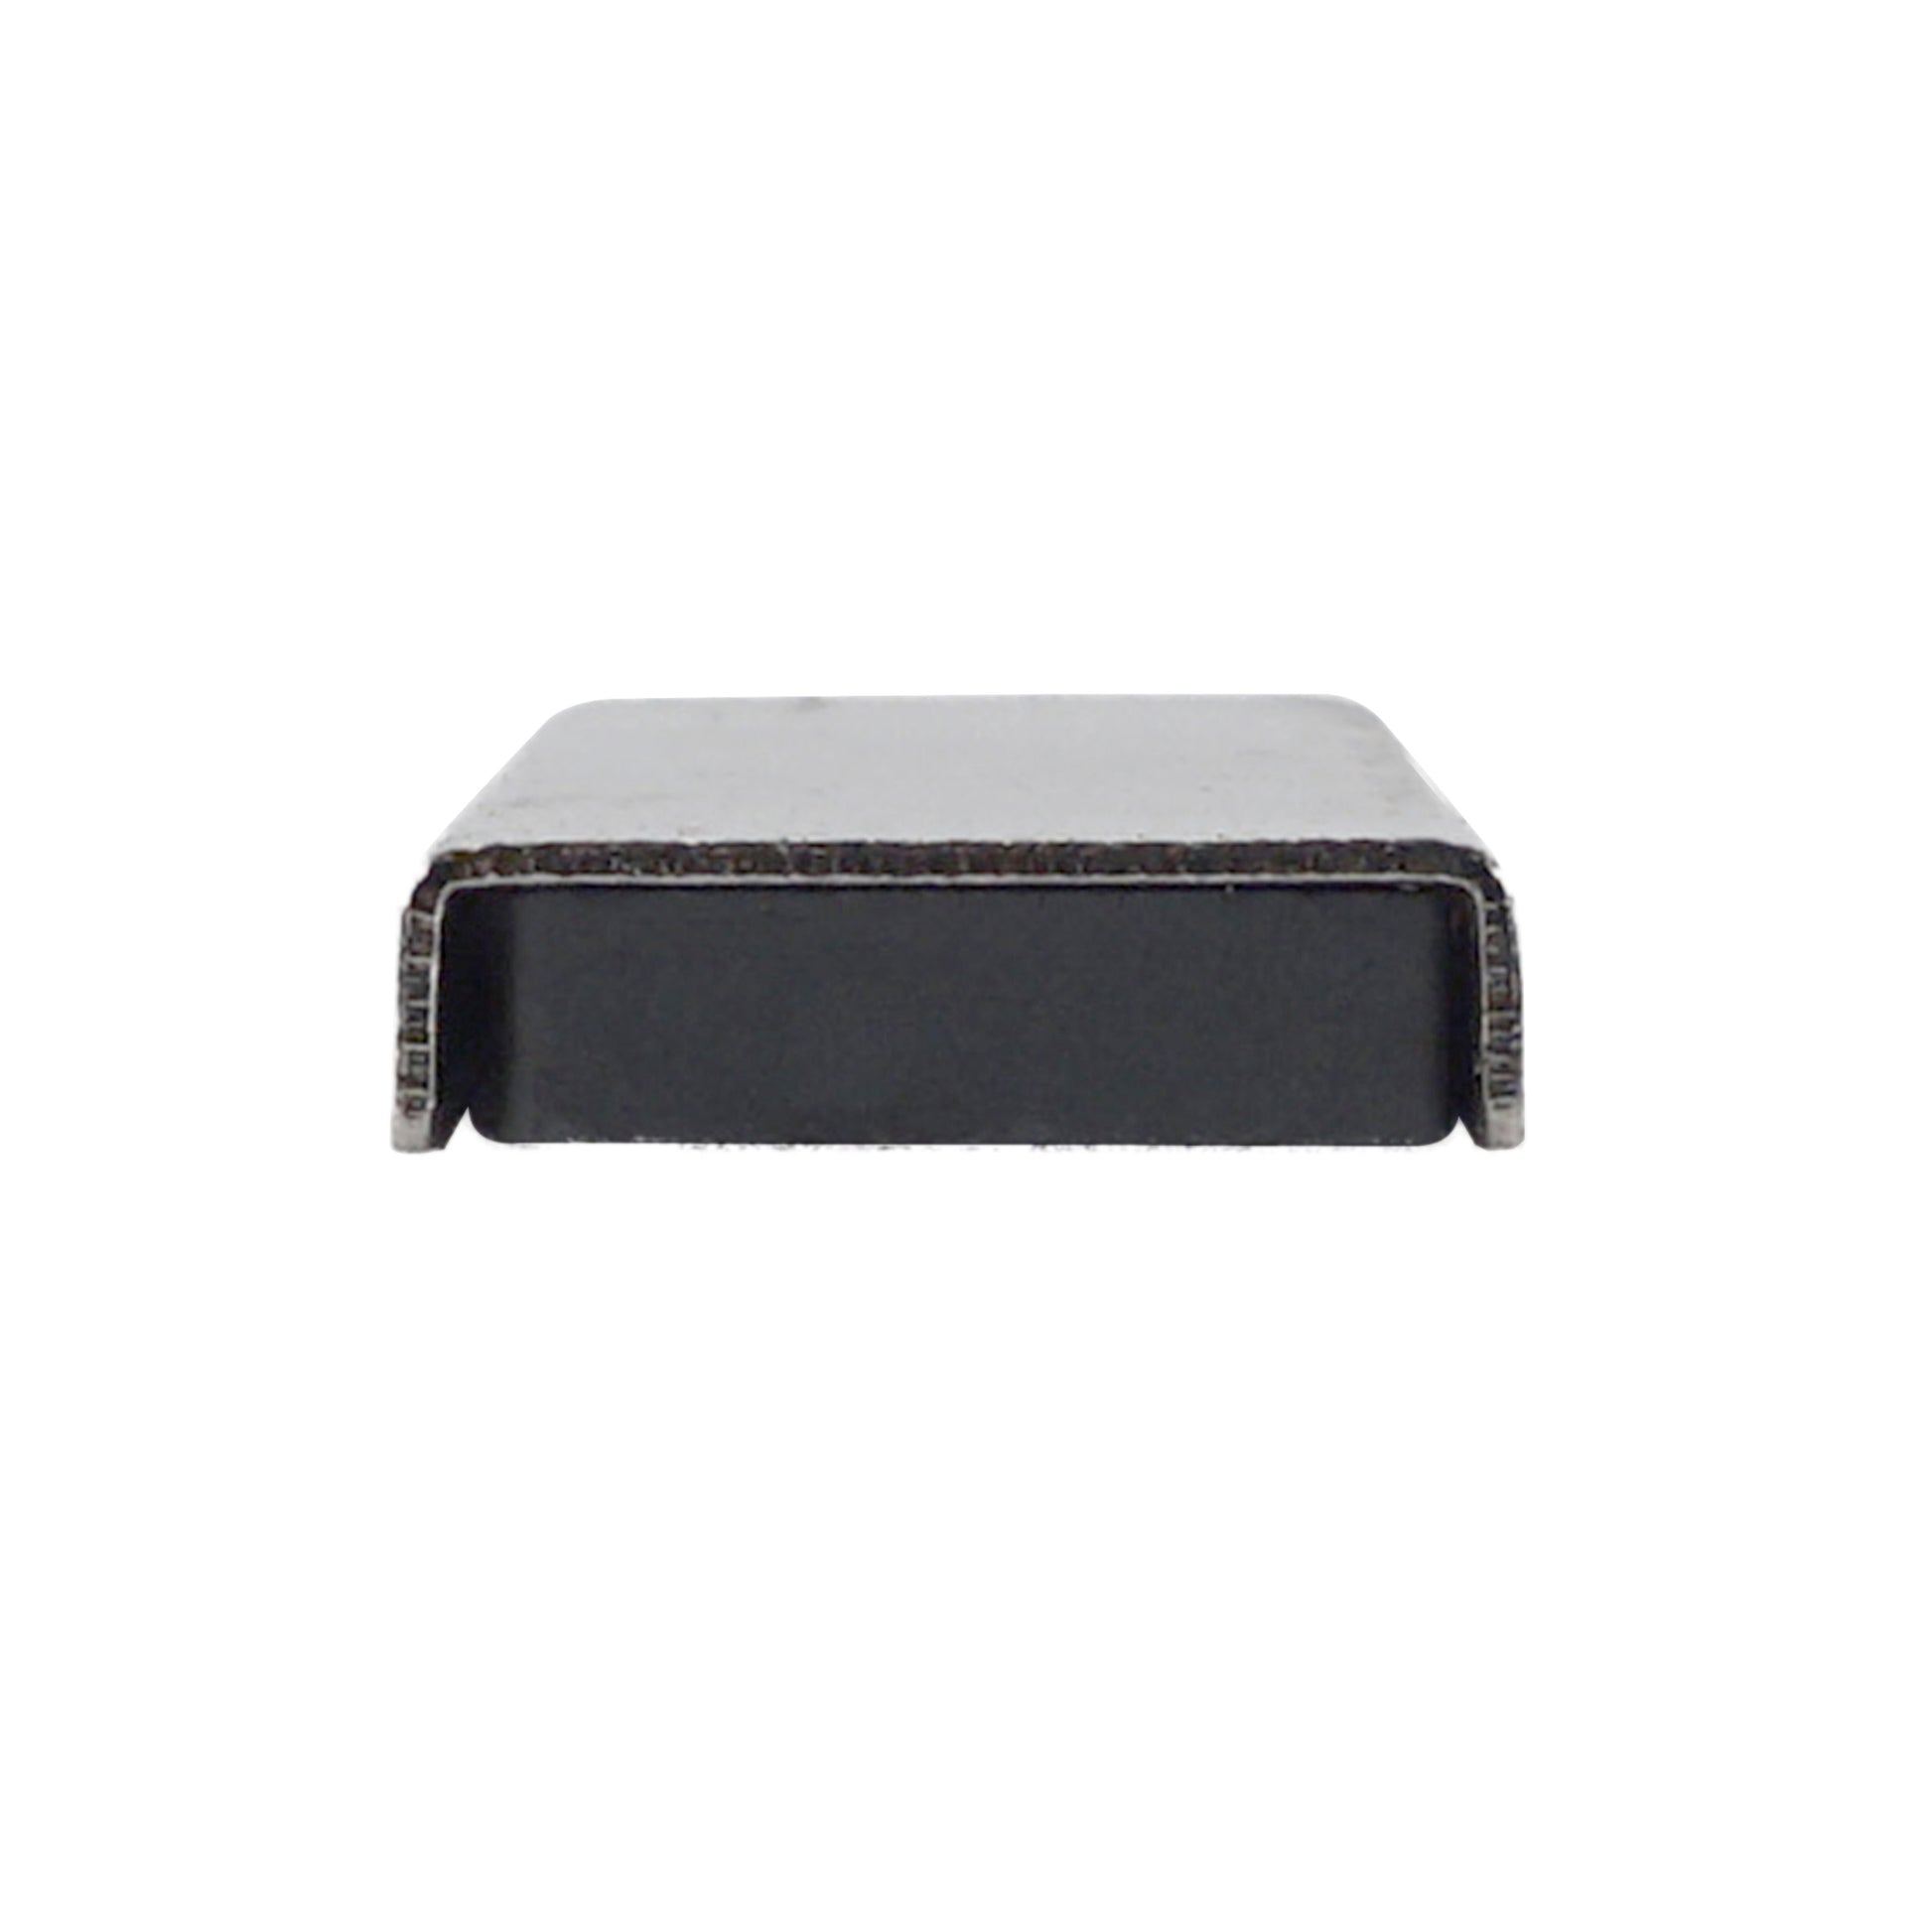 Load image into Gallery viewer, CA293 Ceramic Channel Magnet with Plated Base - Side View